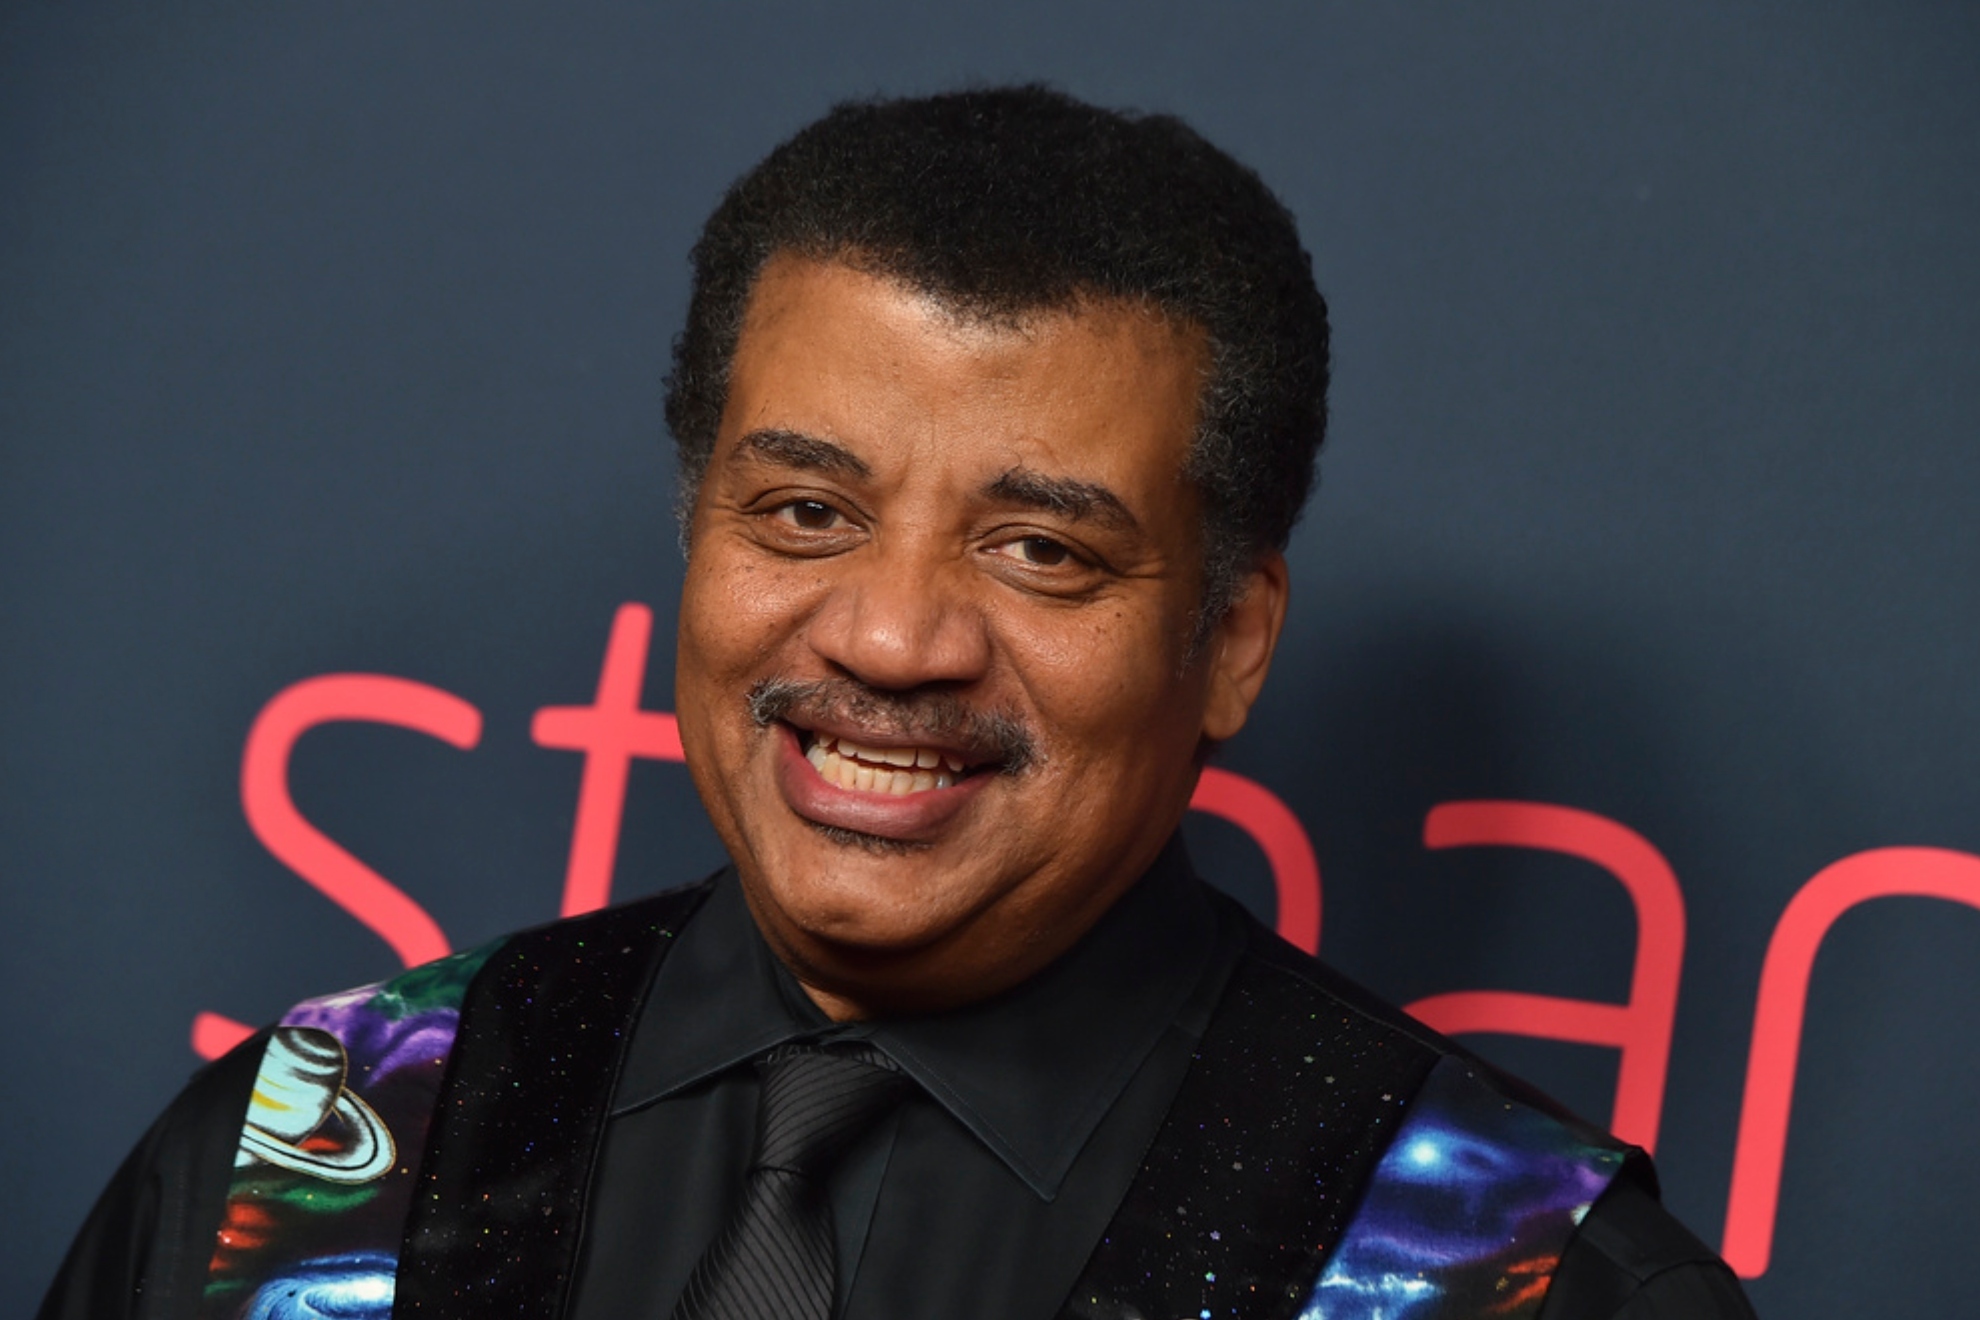 Neil deGrasse Tyson sort of 'on board' with the aliens being presented to the Mexican congress